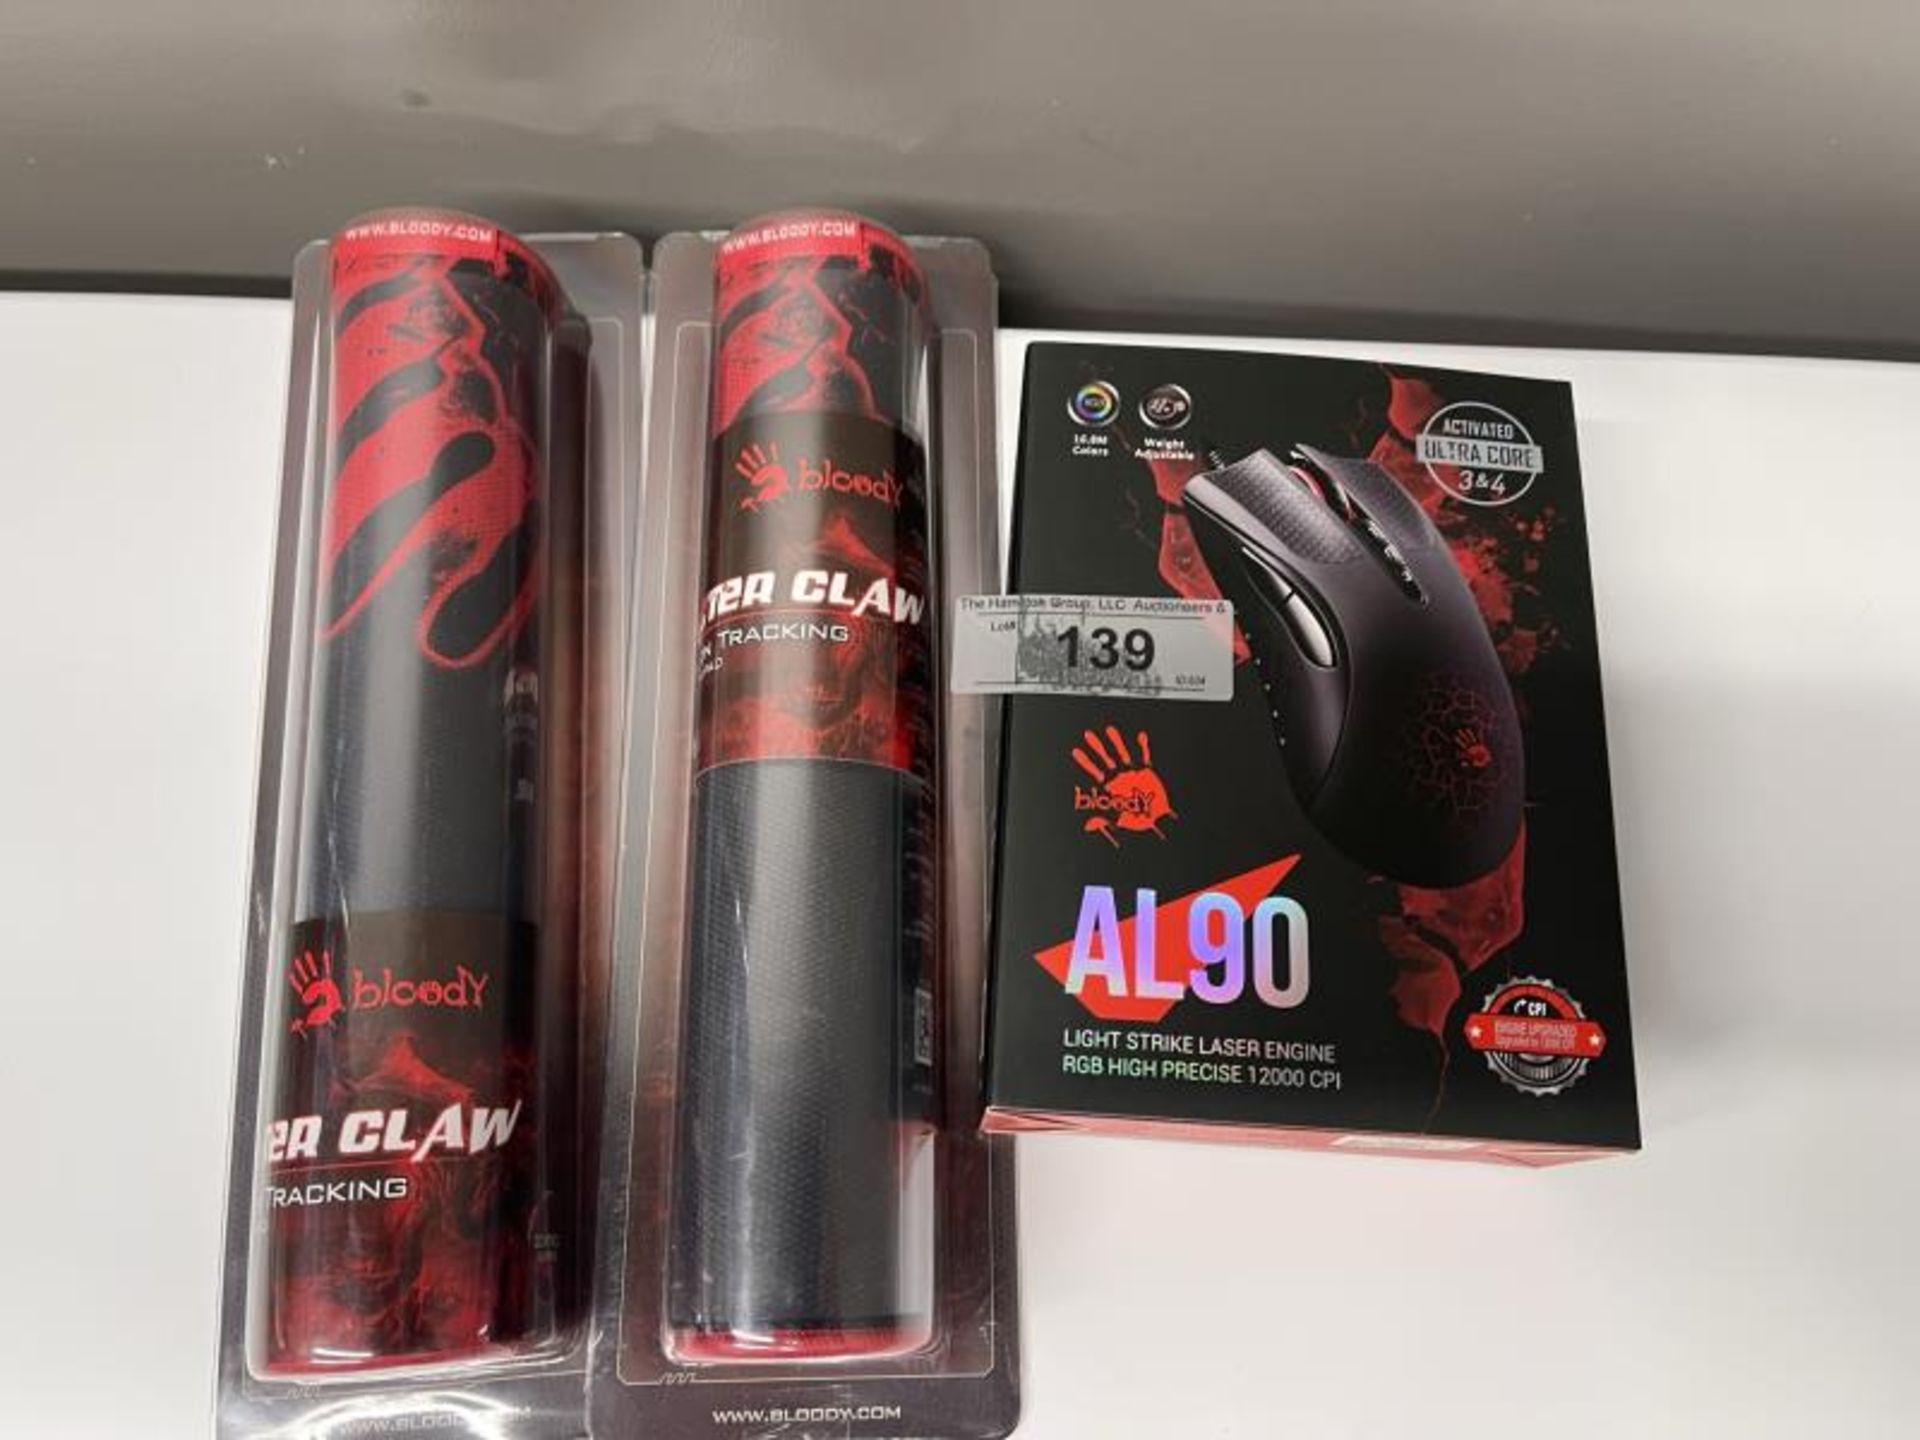 Bloody AL90 Light Strike Laser Gaming Mouse & Precision Tracking Pads - Image 2 of 4